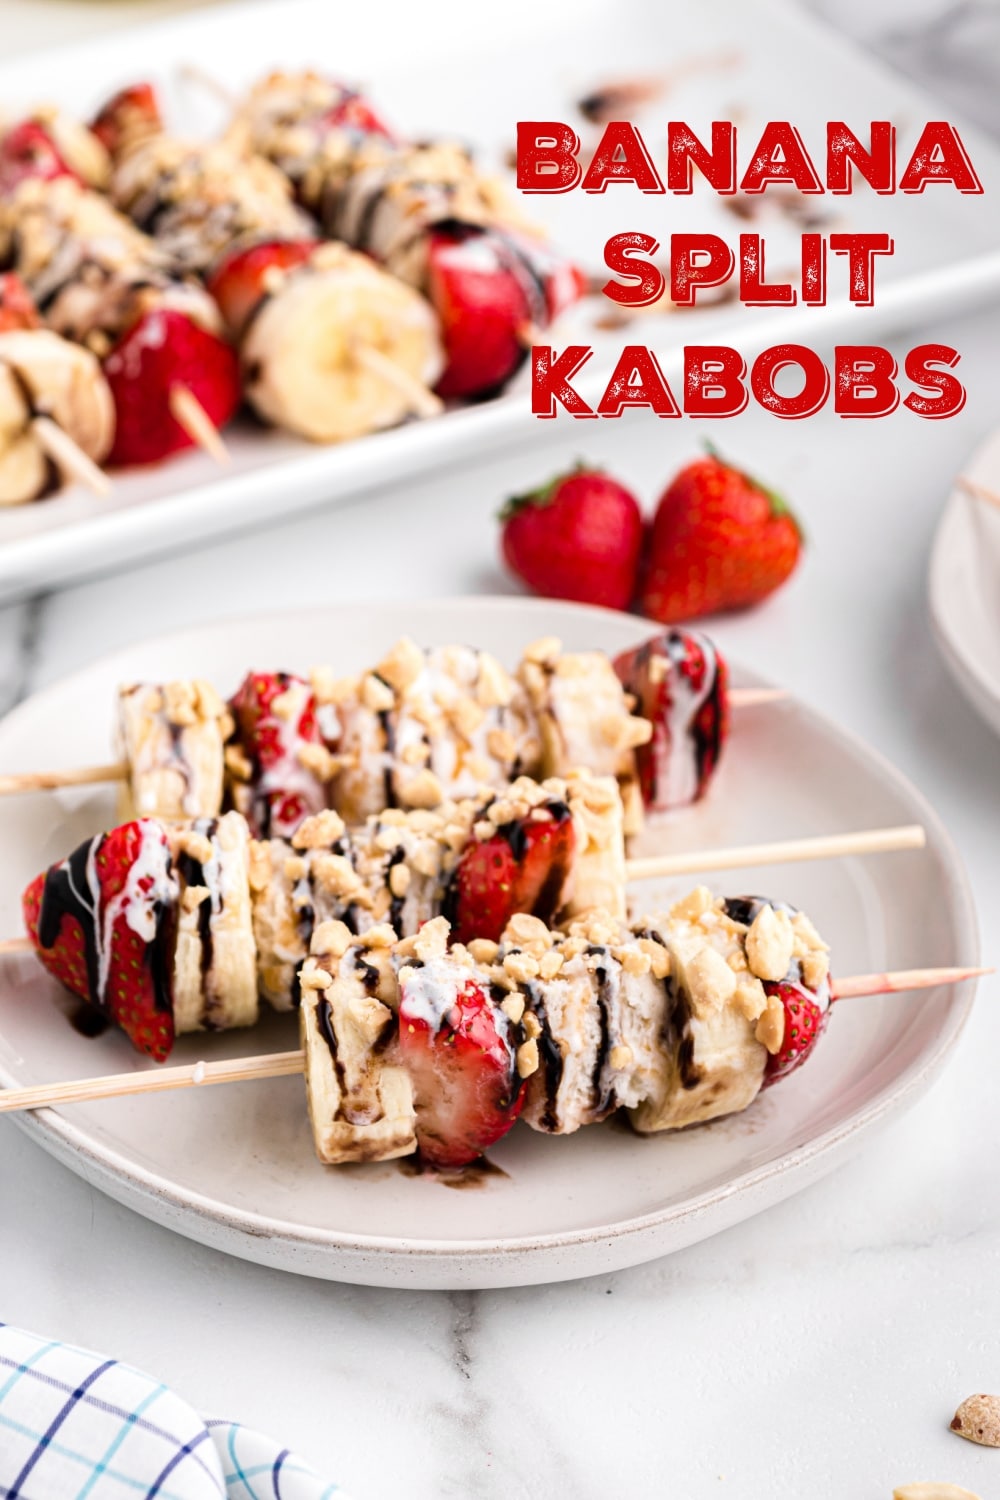 A fun spin on a classic, these Banana Split Kabobs are going to raise the sweet vibe at all your summer gatherings. via @cmpollak1